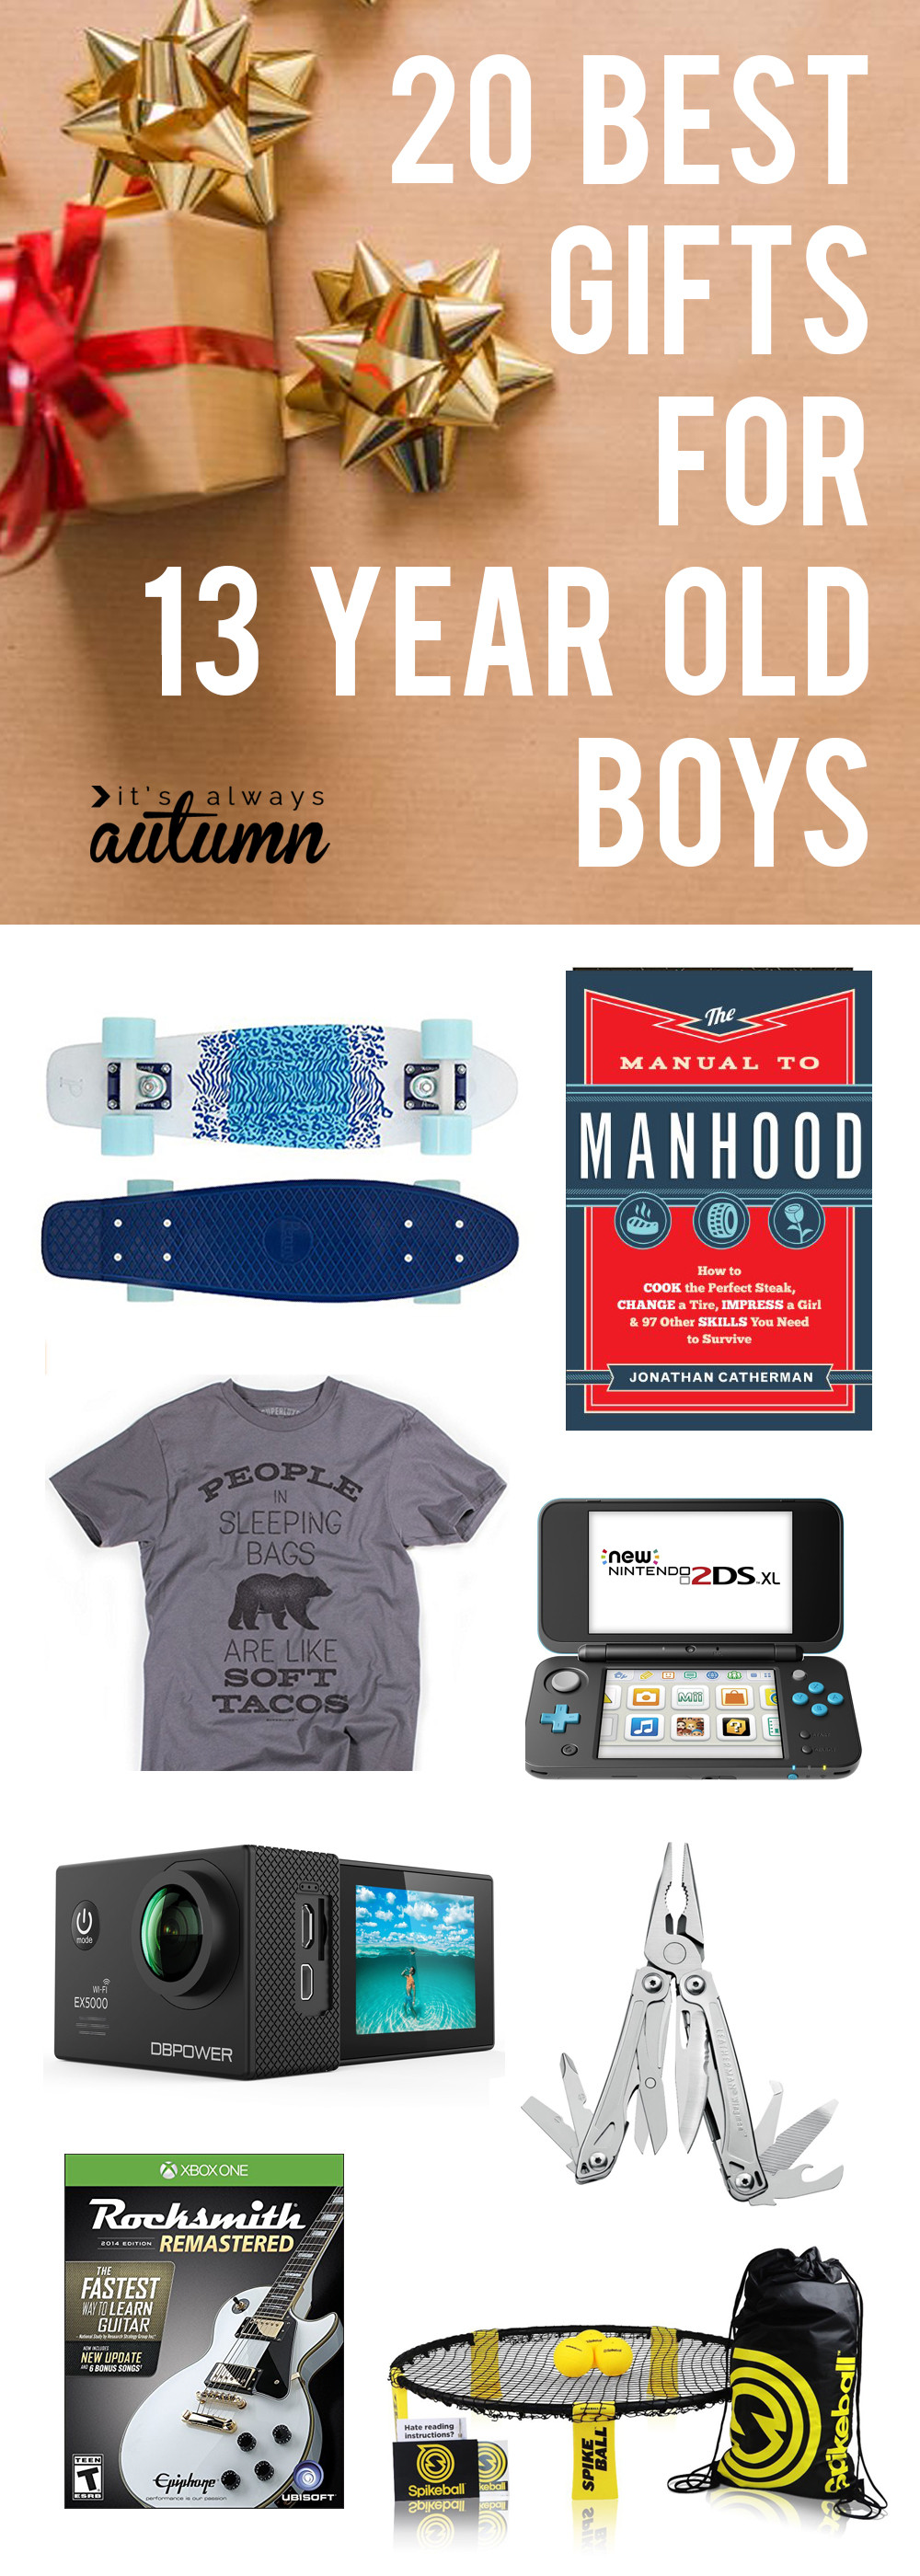 Top Gift Ideas For Boys
 best Christmas ts for 13 year old boys It s Always Autumn